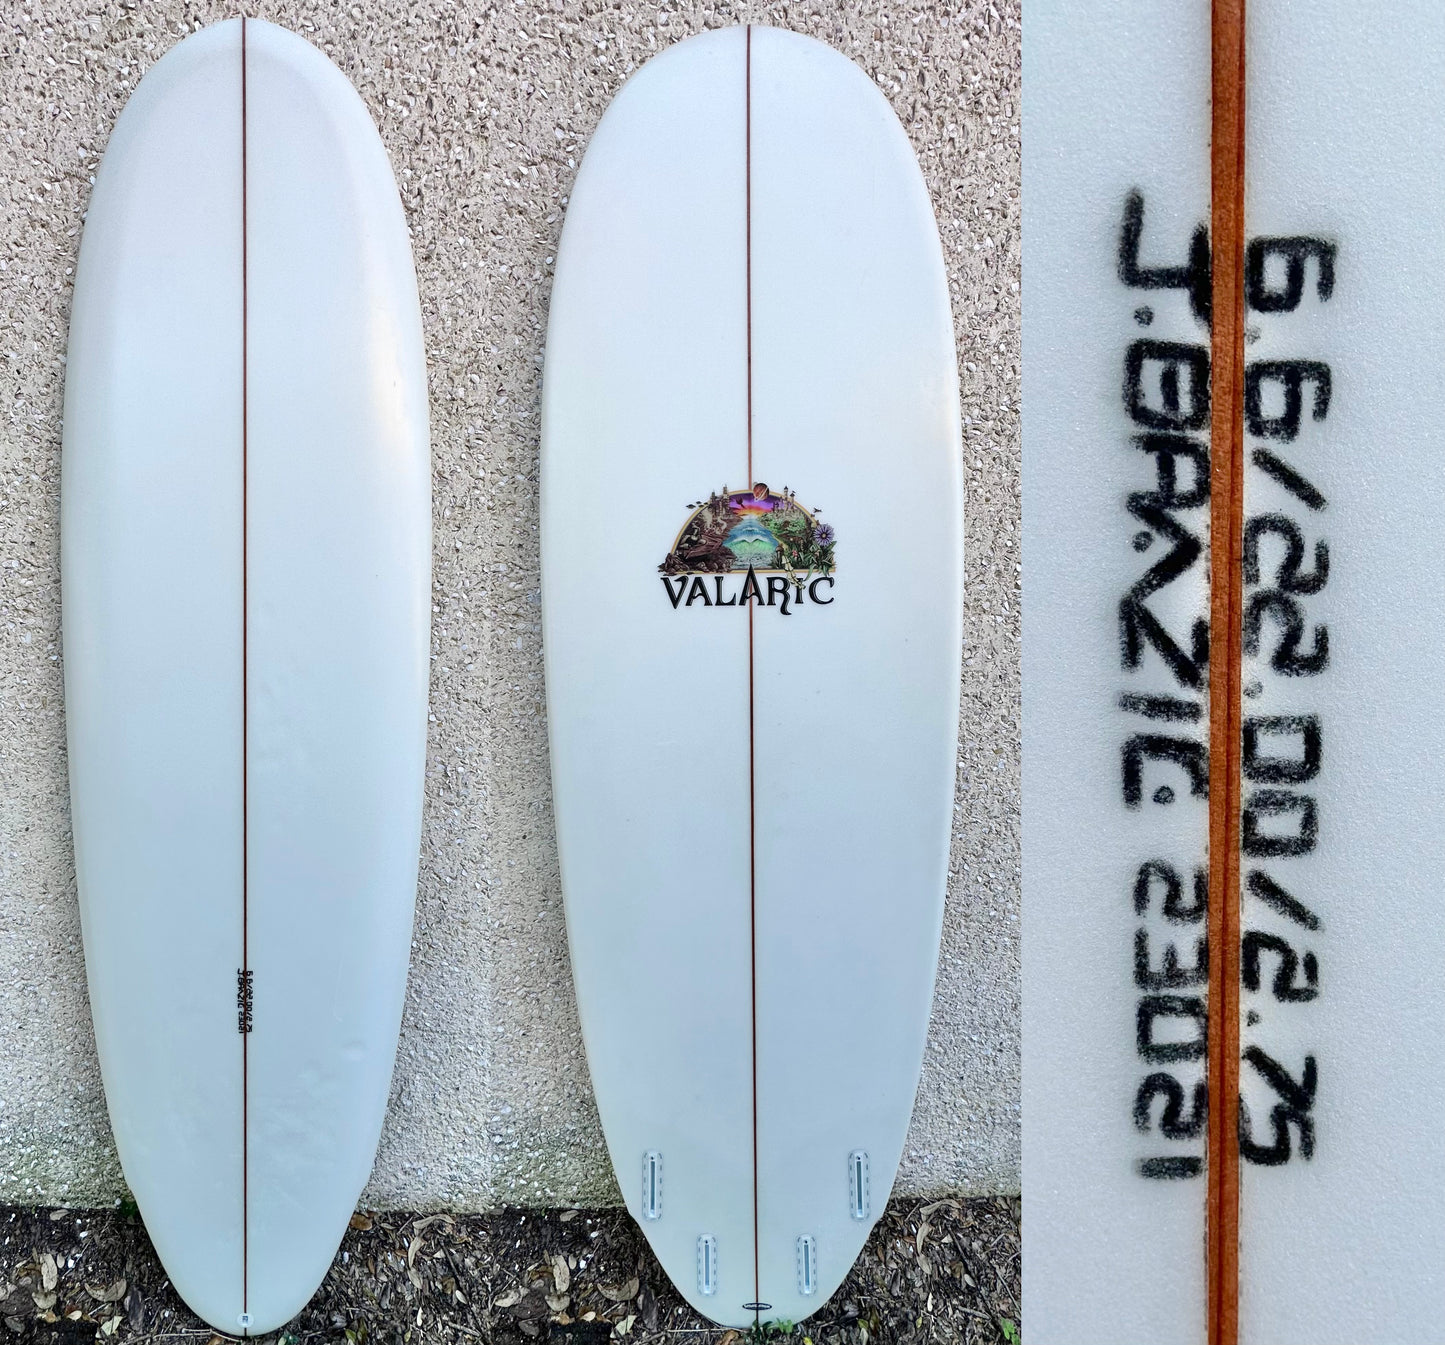 Pre-Owned Valaric 6’6”